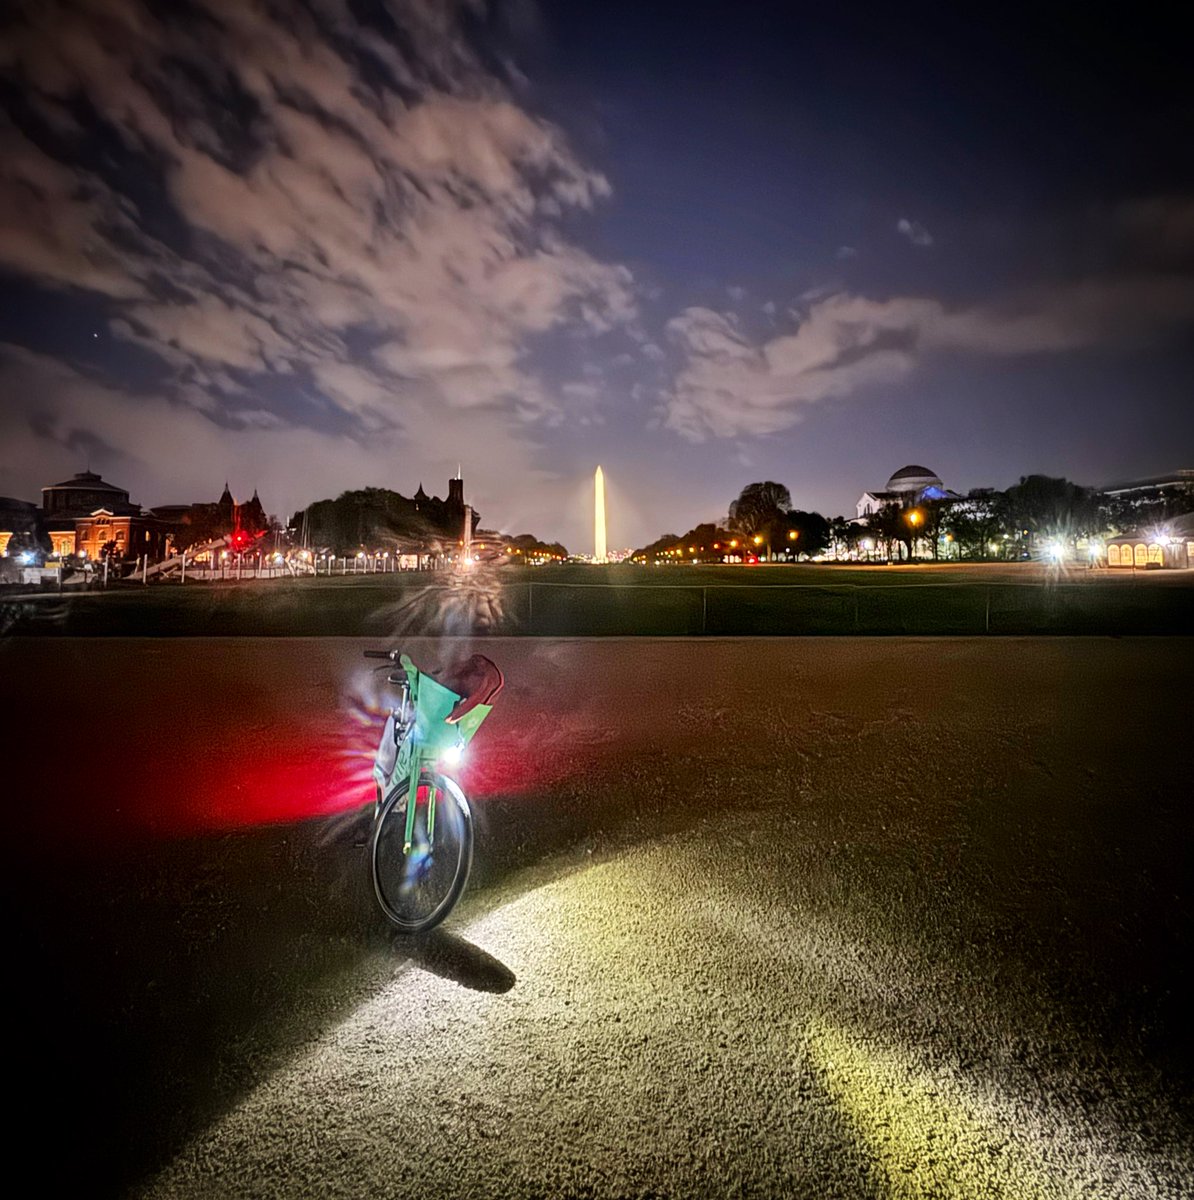 One night, when you're in DC, rent an e-bike or scooter and ride up and down the National Mall from the Capitol to the Washington Monument. You won't regret it.